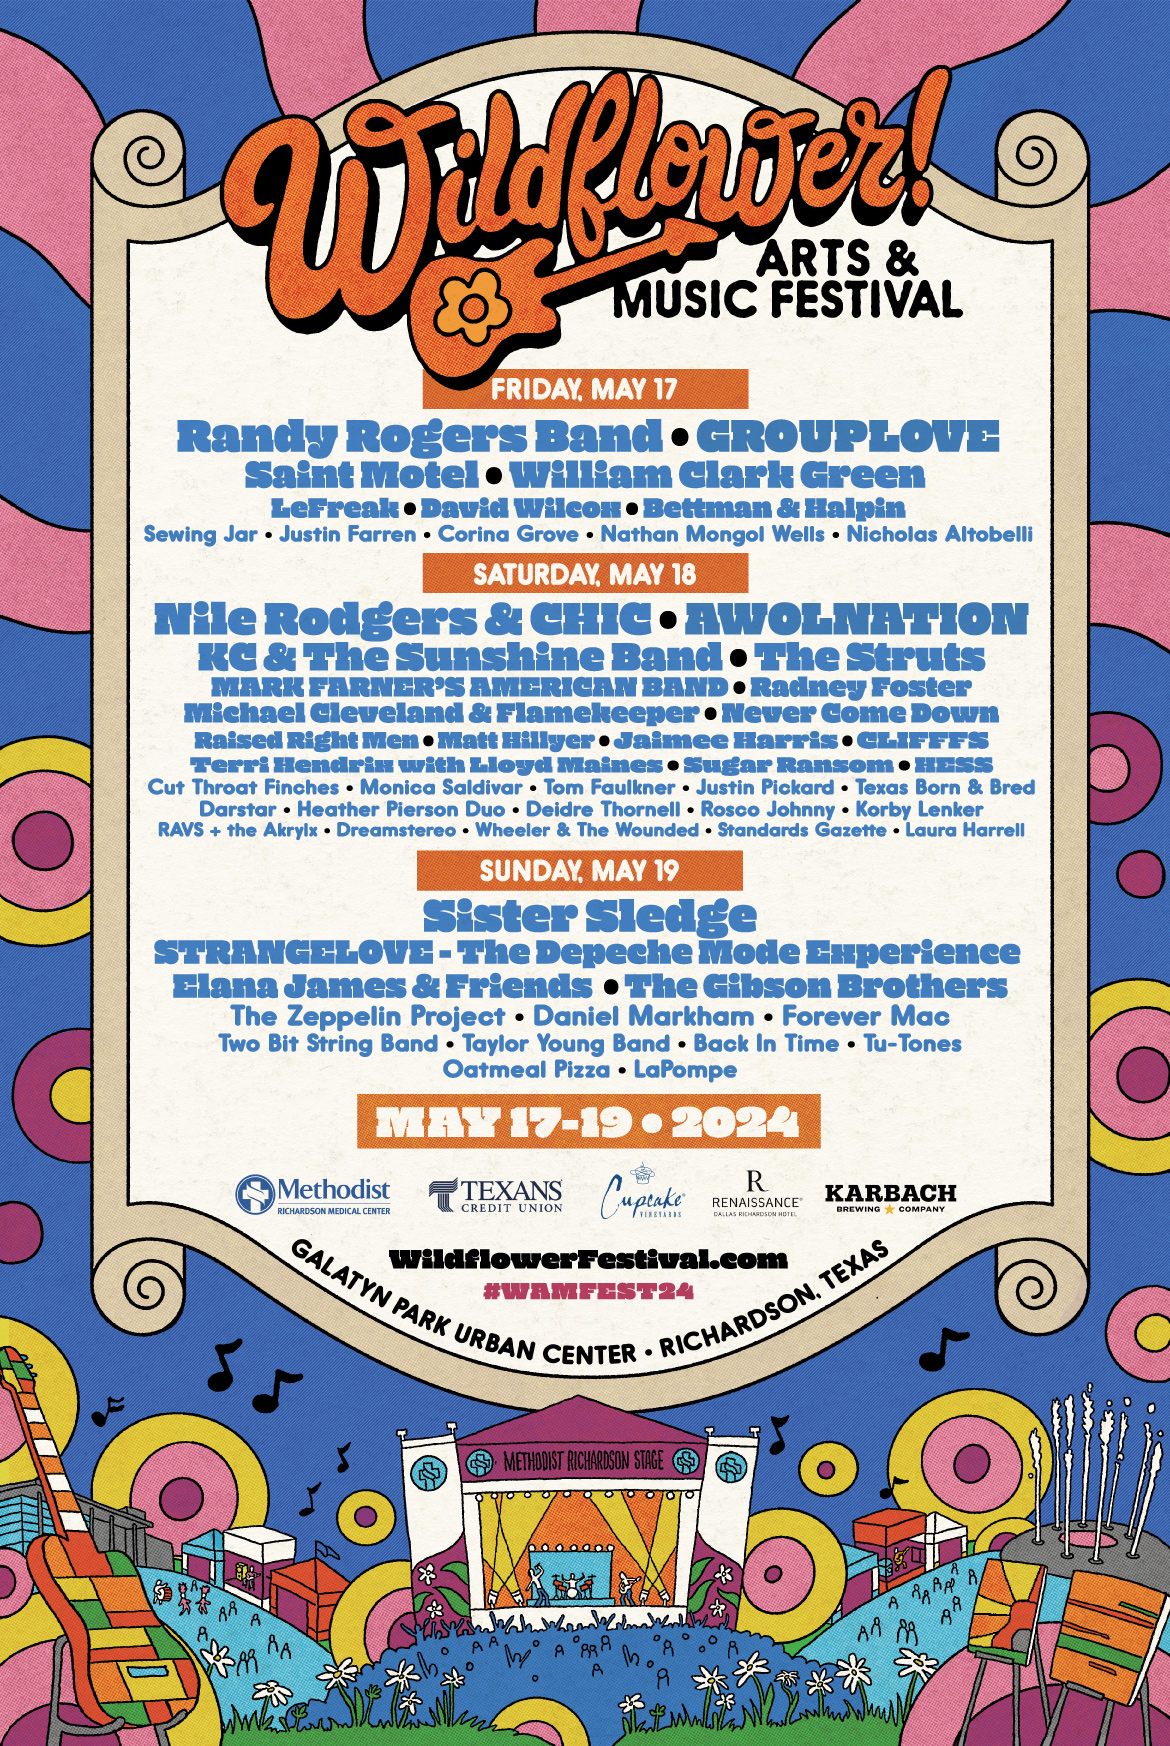 Wildflower Arts & Music Festival lineup poster